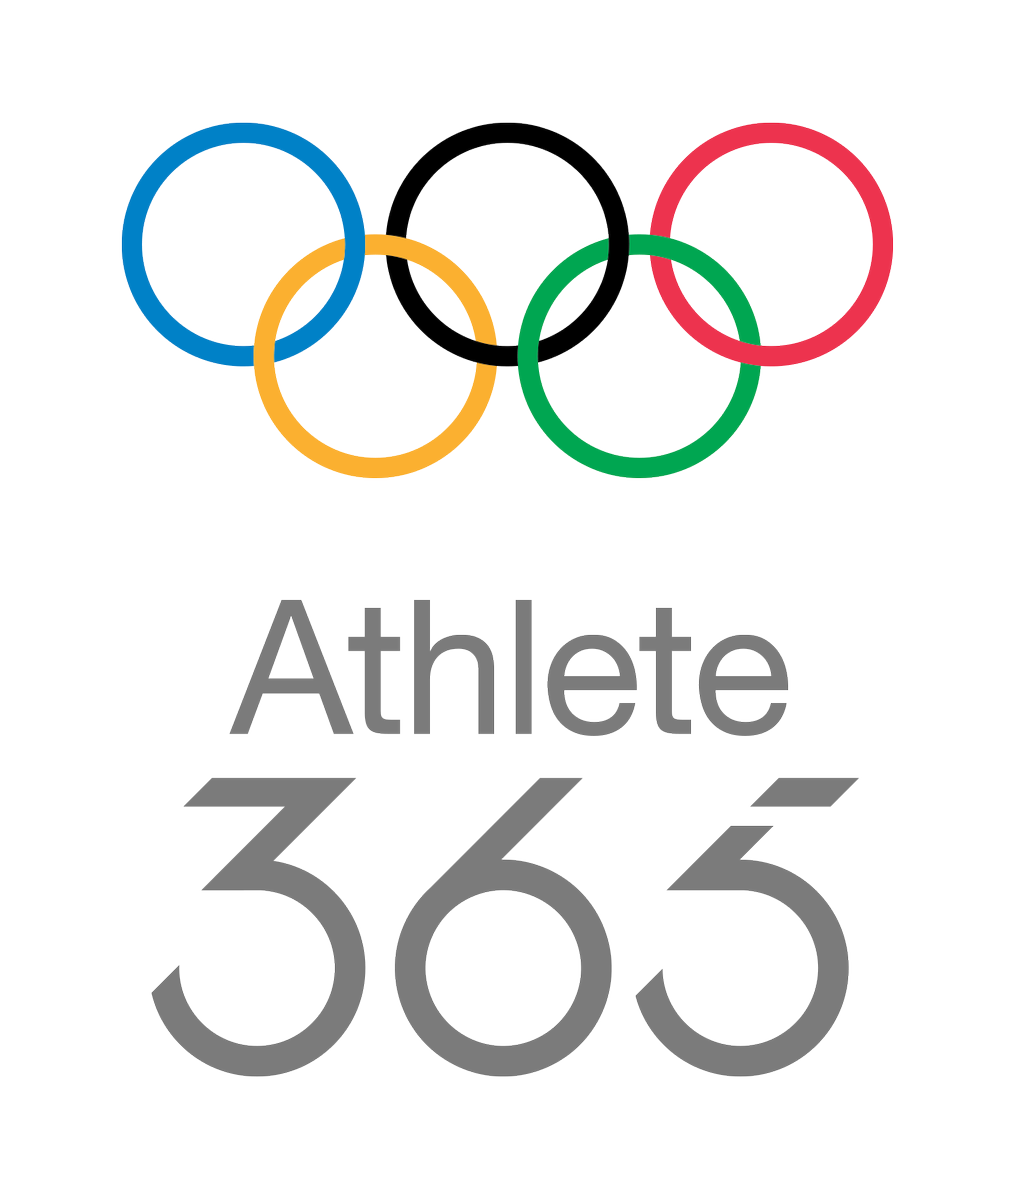 We're on the search for a social media and comms expert to join our #athlete365 team. Check out the #Jobopportunity here linkedin.com/jobs/view/5791…